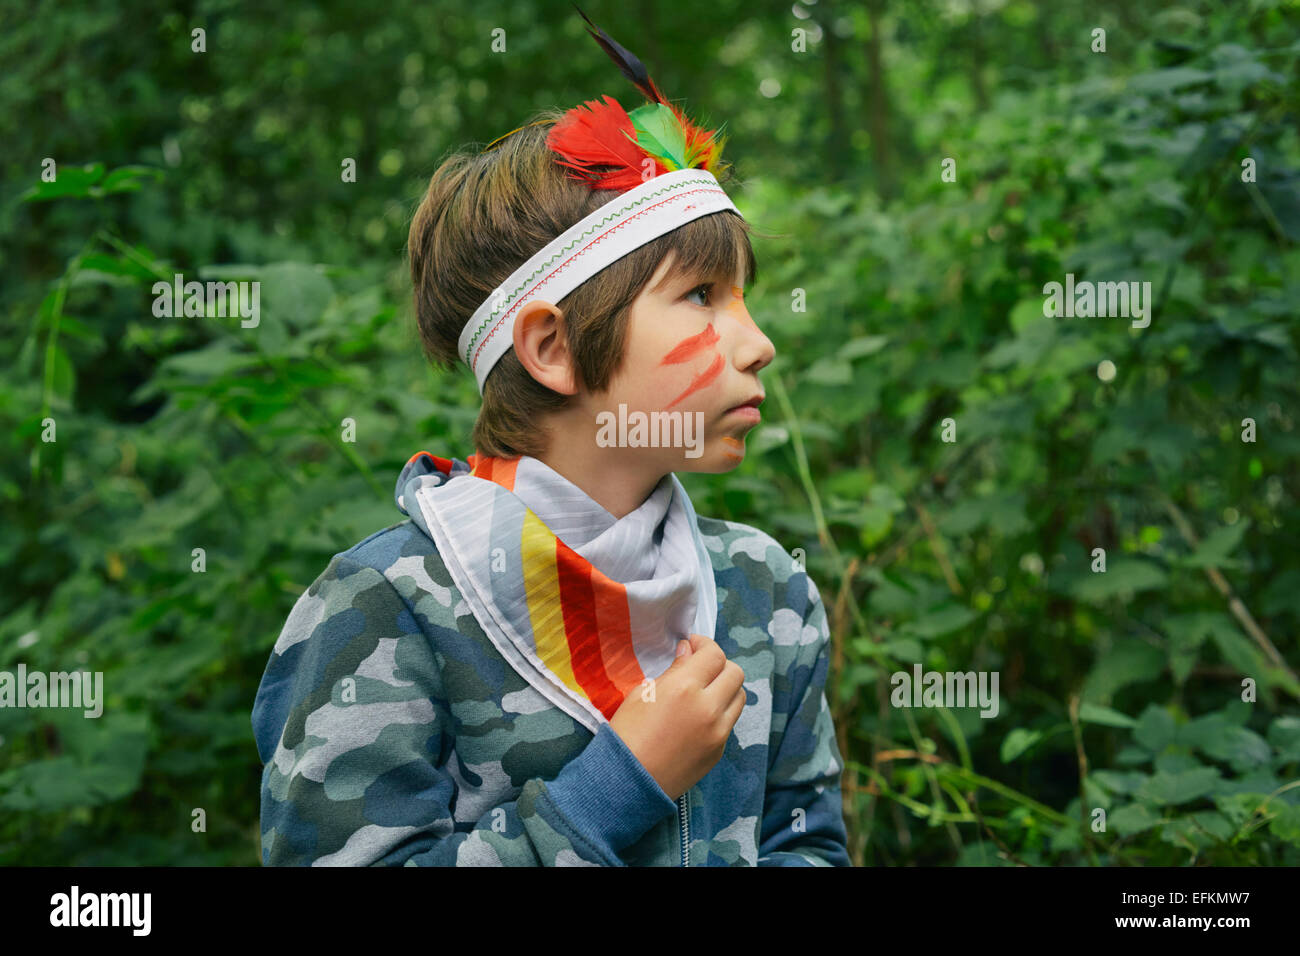 Boy dressed up in face paint and playing in forest Stock Photo